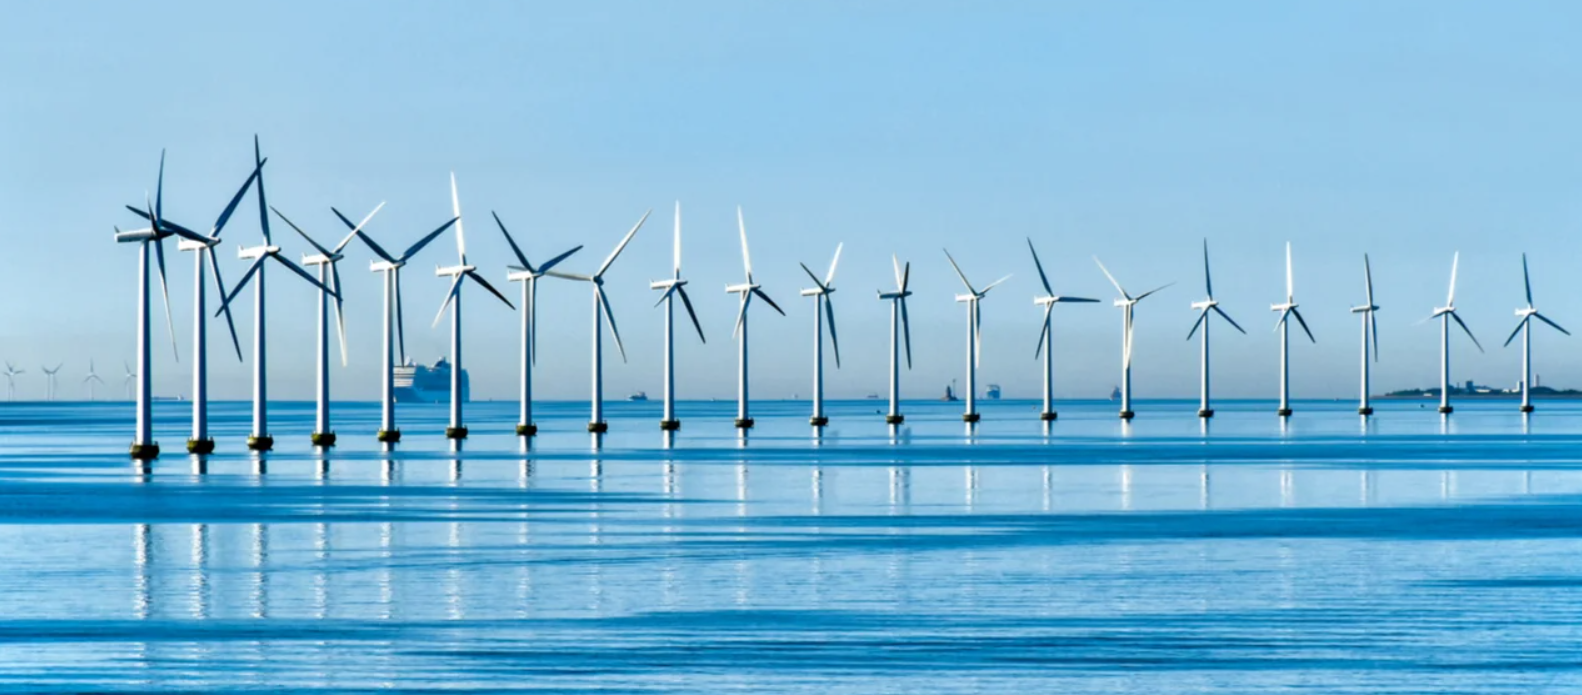 Denmark's offshore wind auction set to fulfil entire national electricity demand